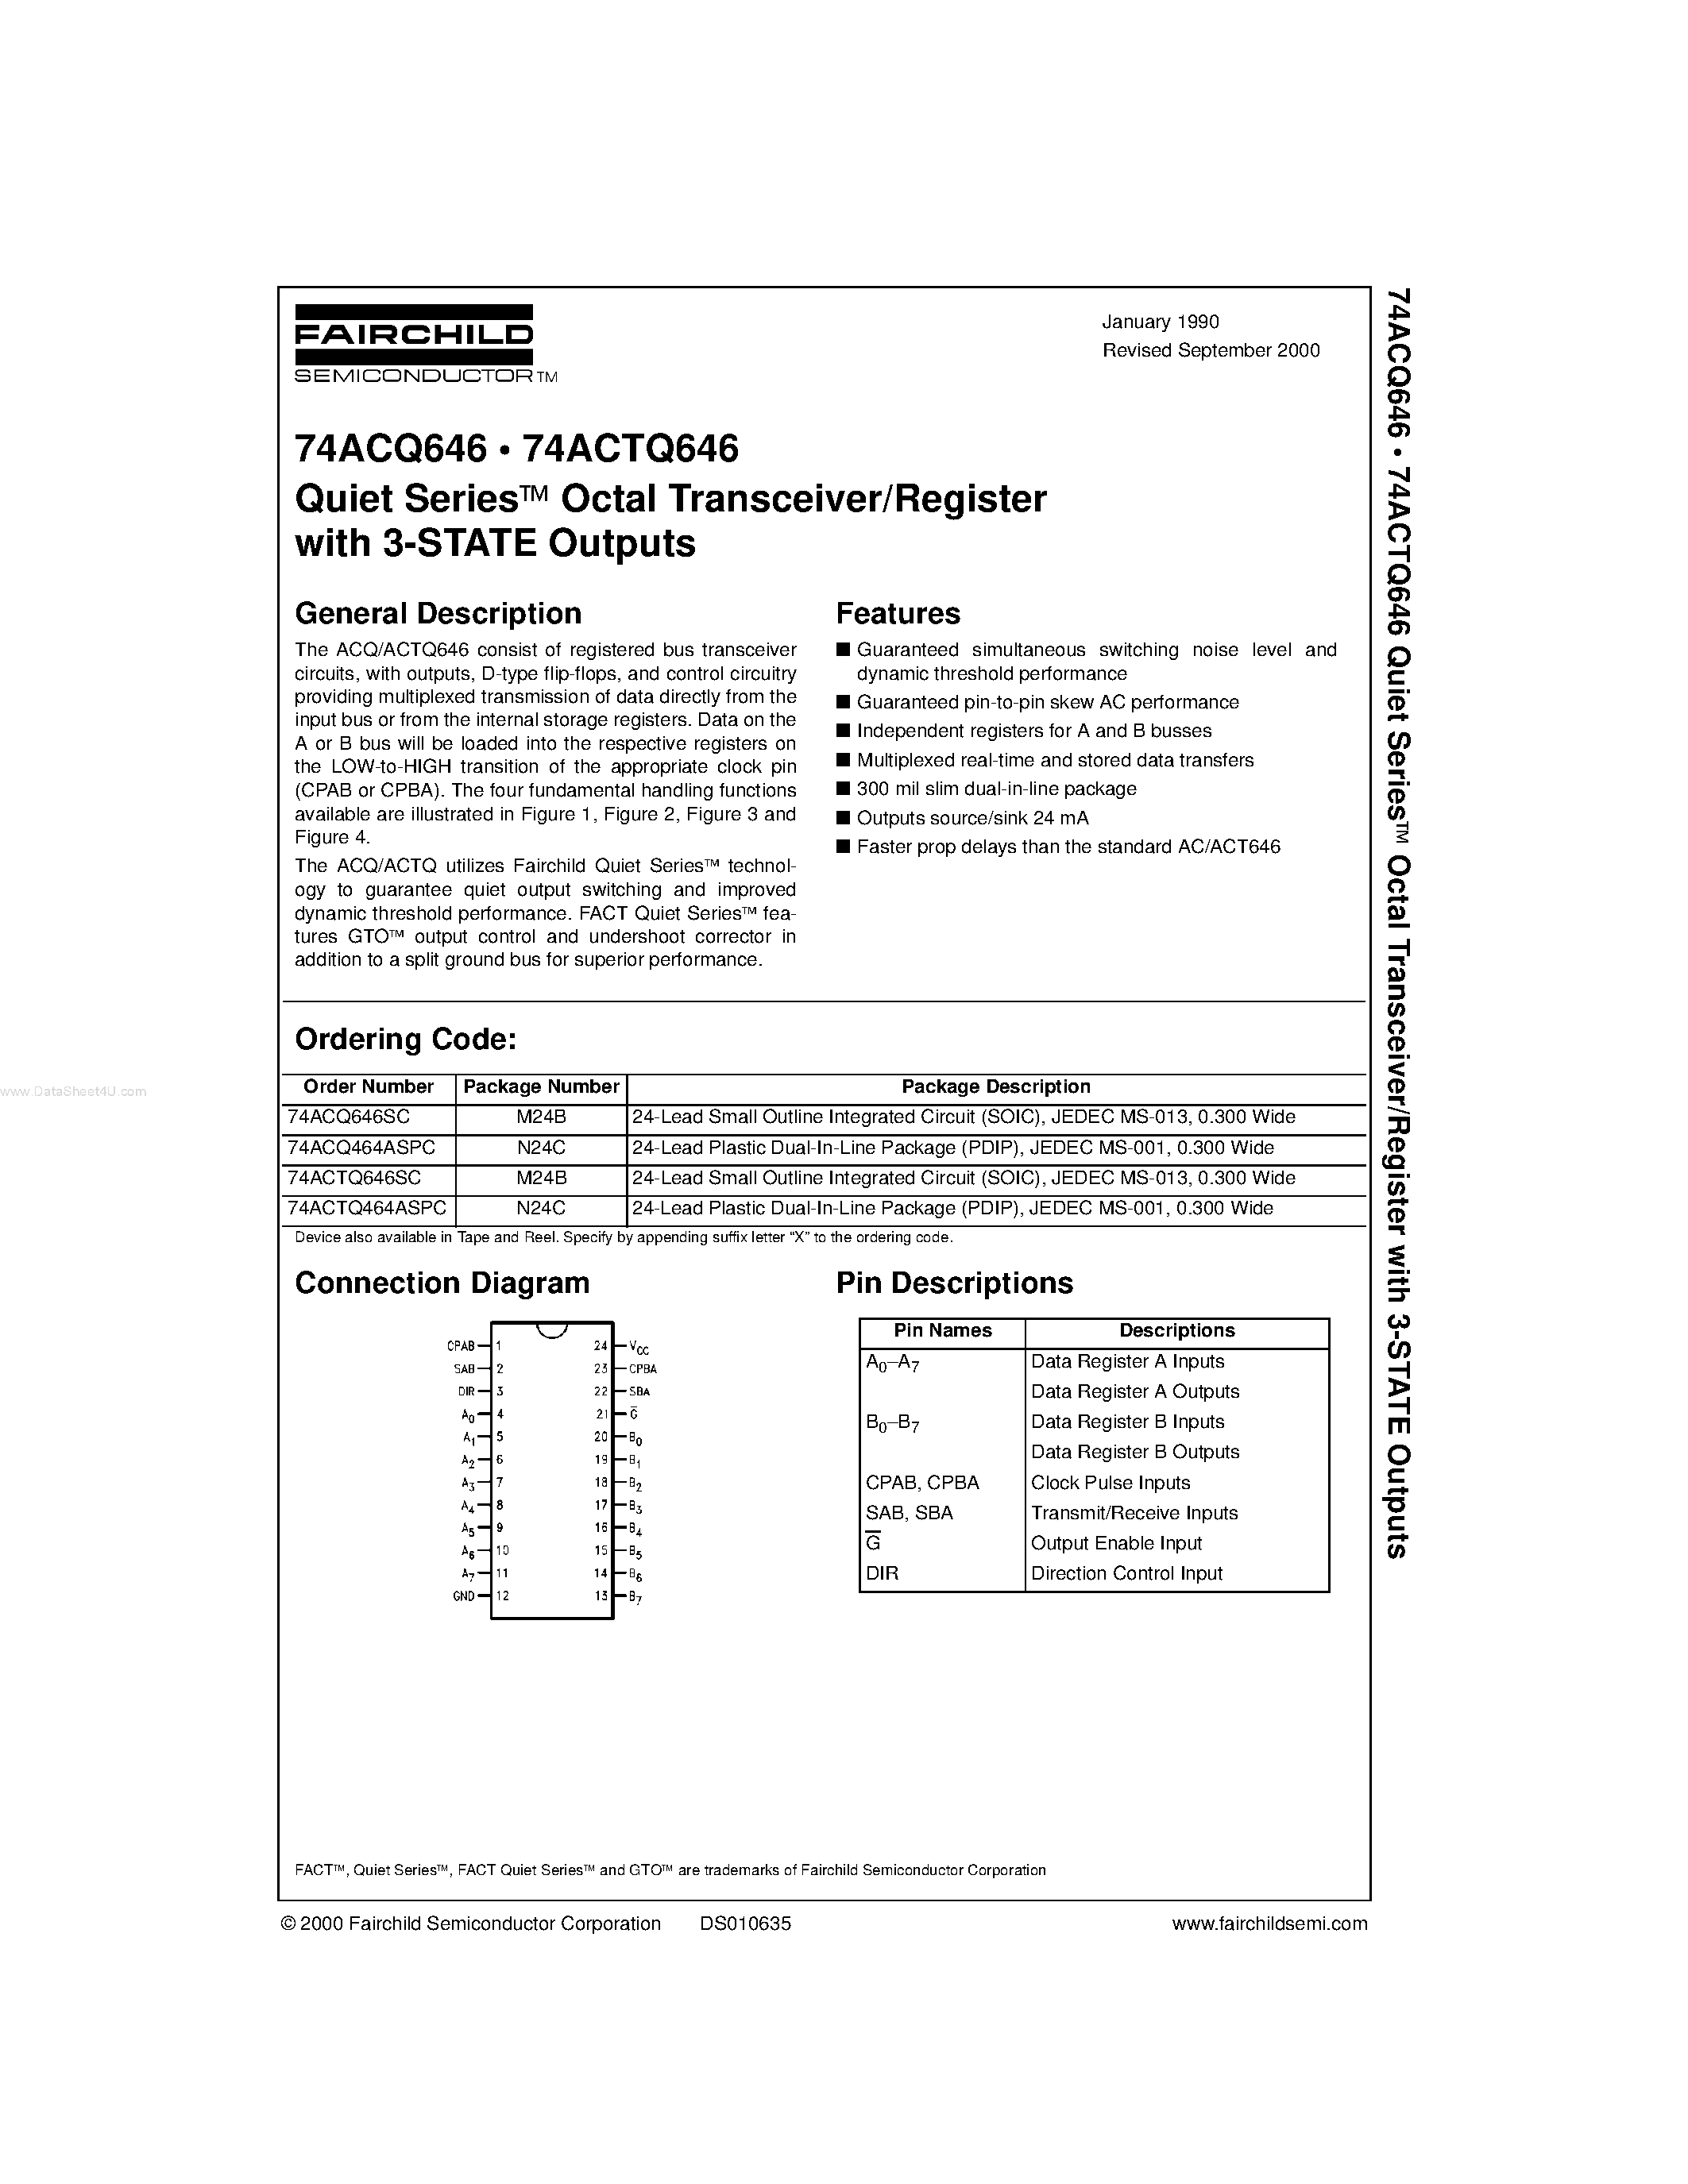 Datasheet 74ACQ646 - Quiet Series Octal Transceiver/Register with 3-STATE Outputs page 1